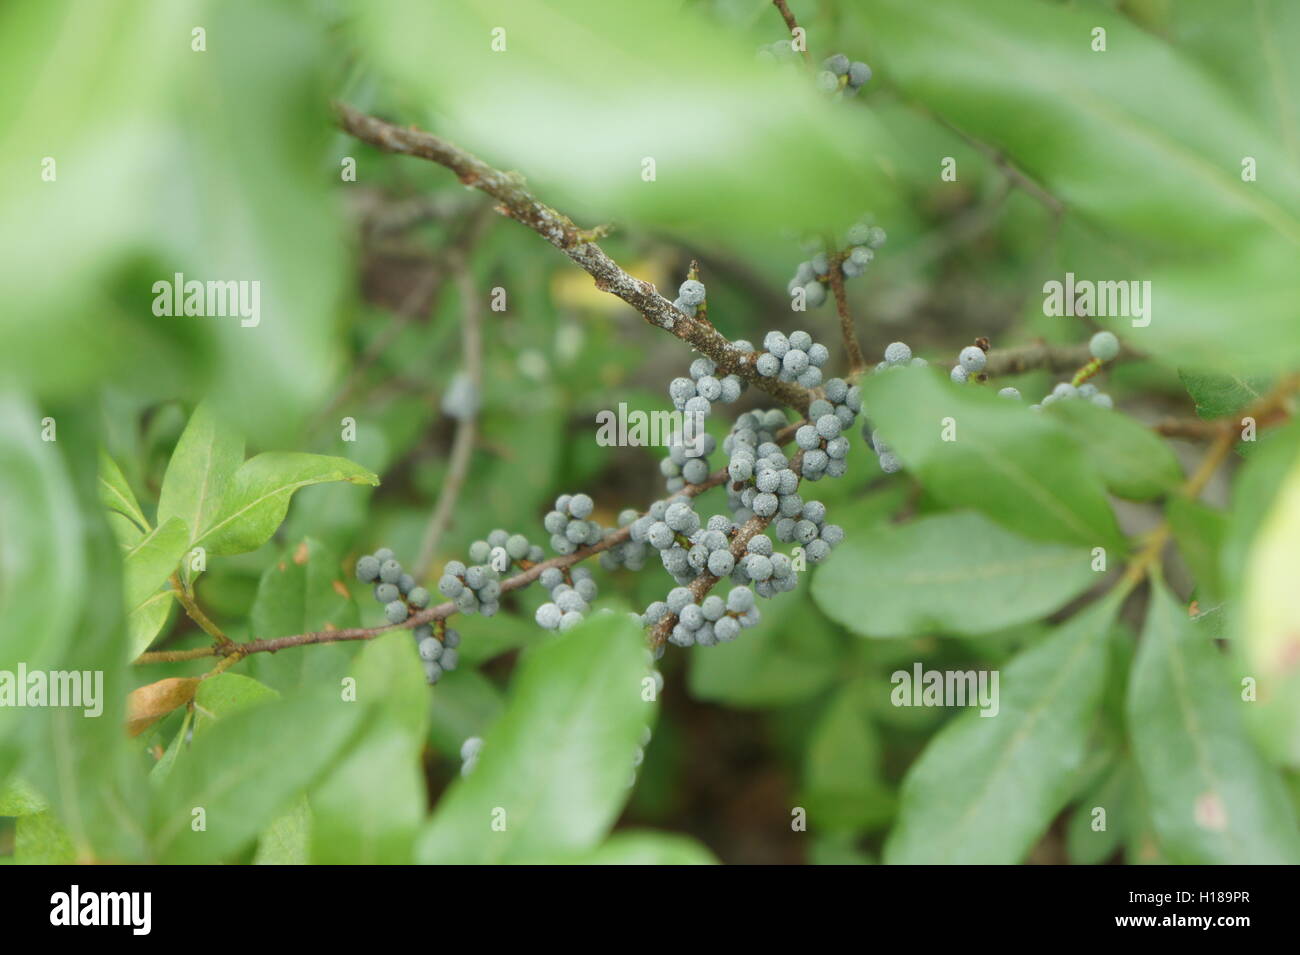 Bayberries on a branch Stock Photo